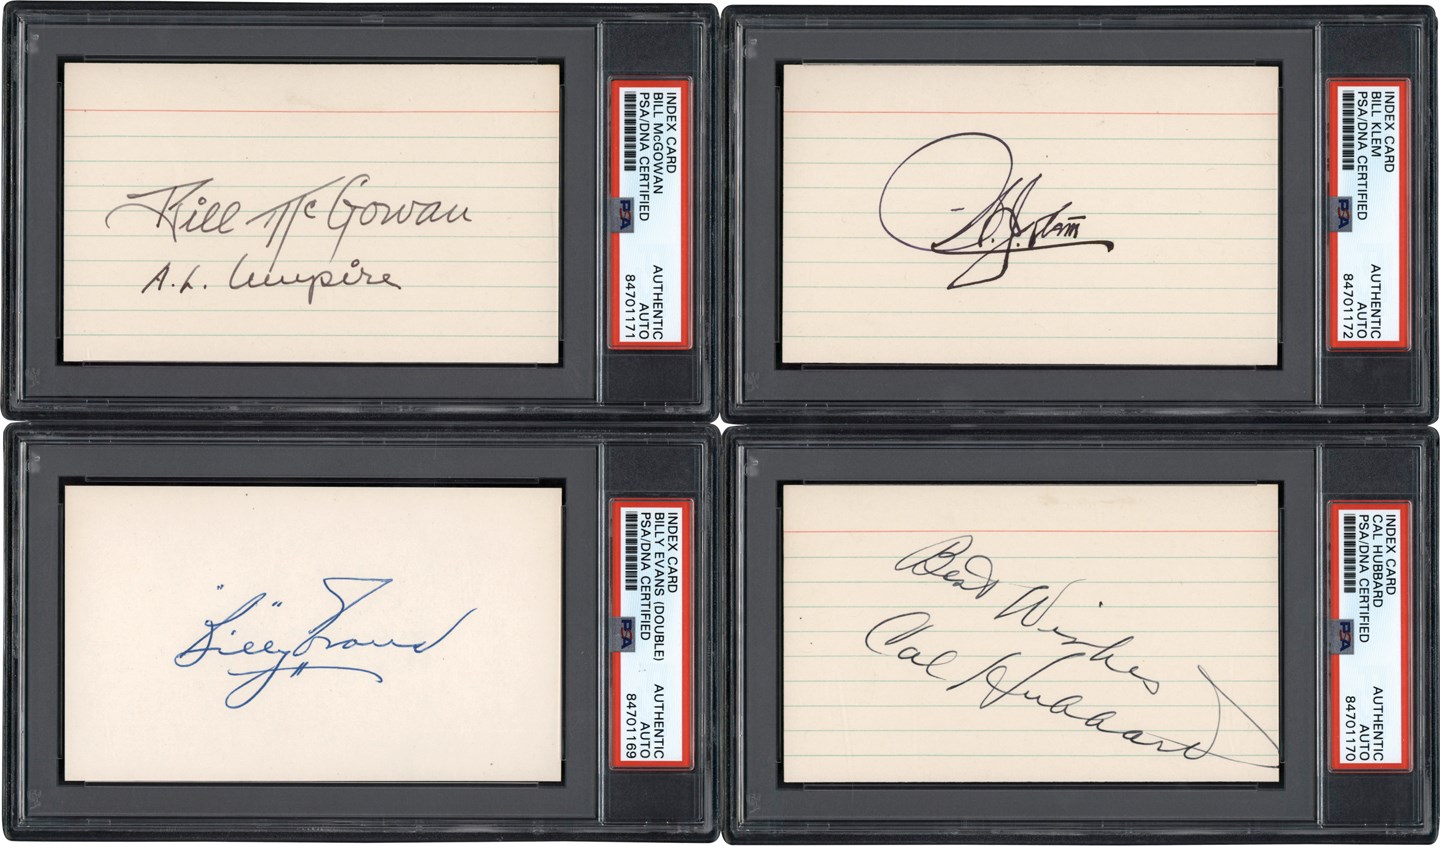 Hall of Fame Umpires Signed Index Card Collection (4) - All PSA Encapsulated